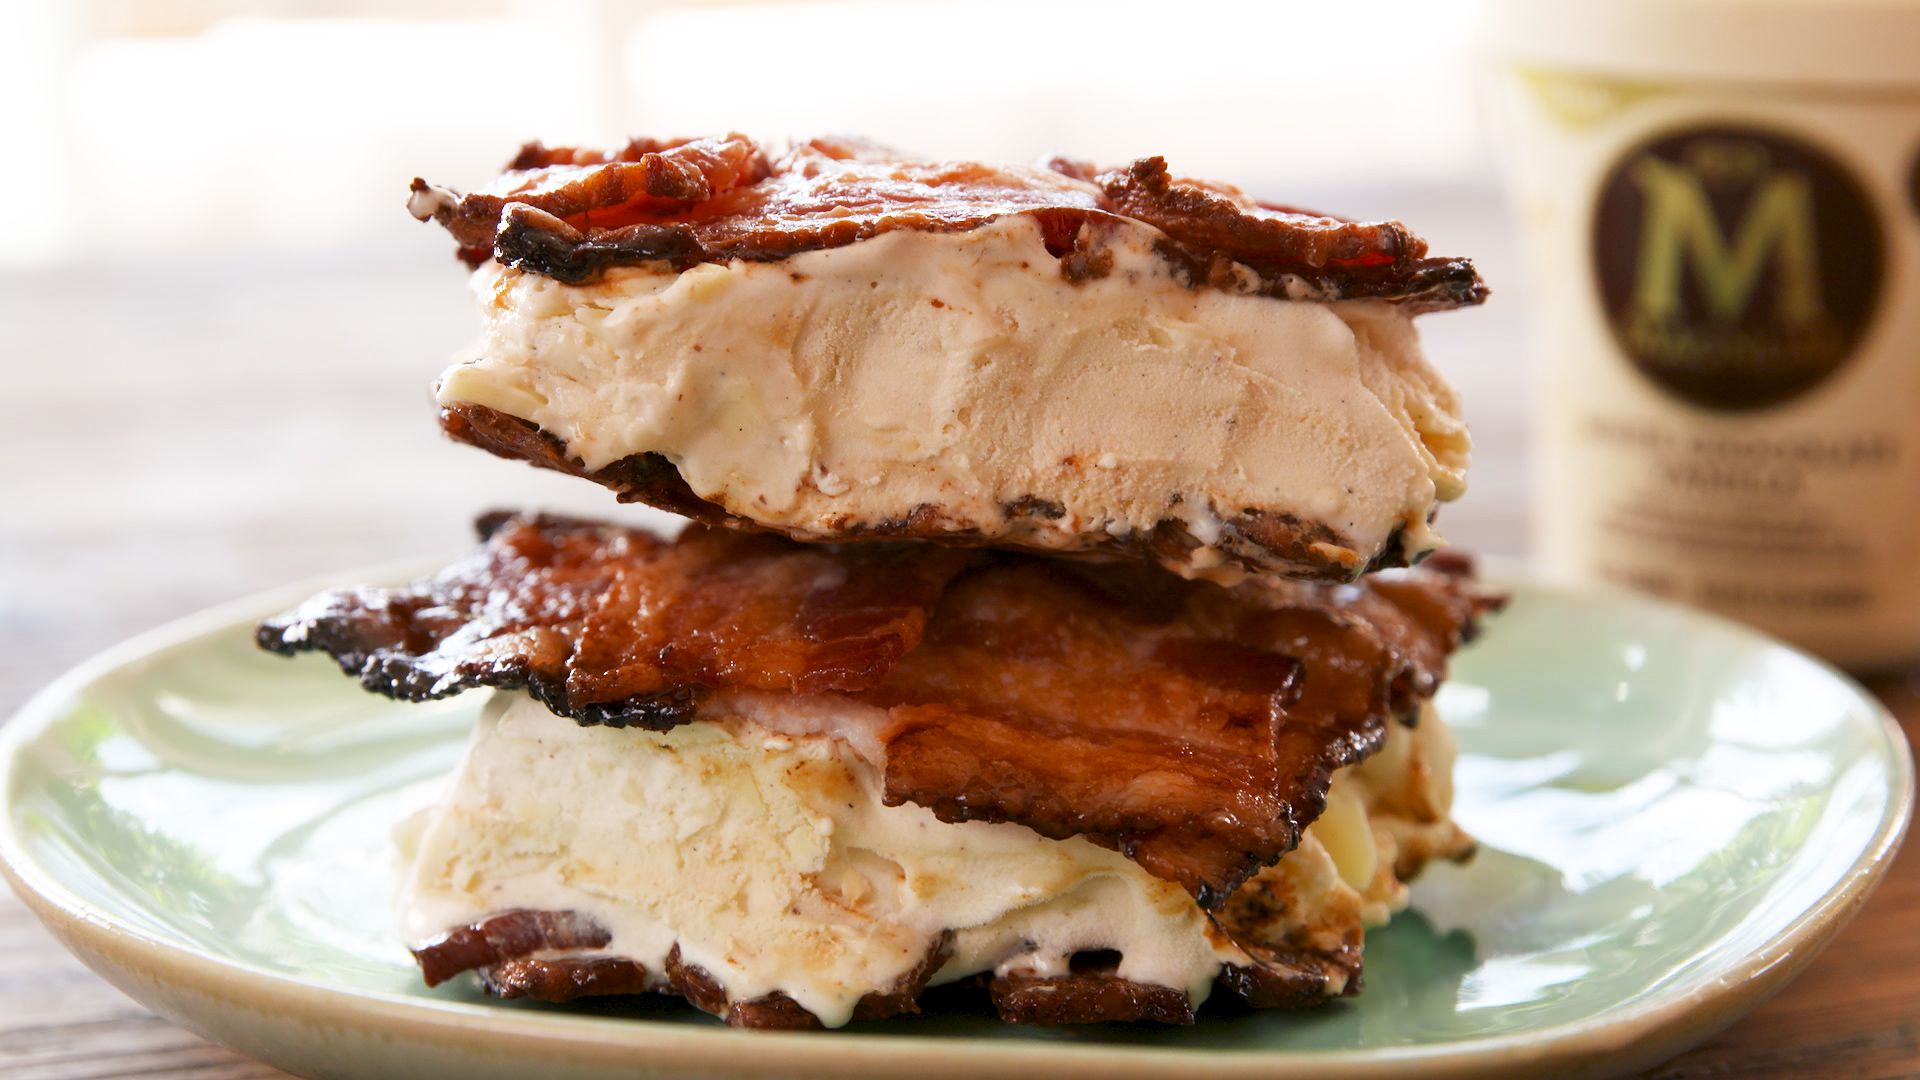 Details more than 141 bacon ice cream cake super hot - awesomeenglish ...